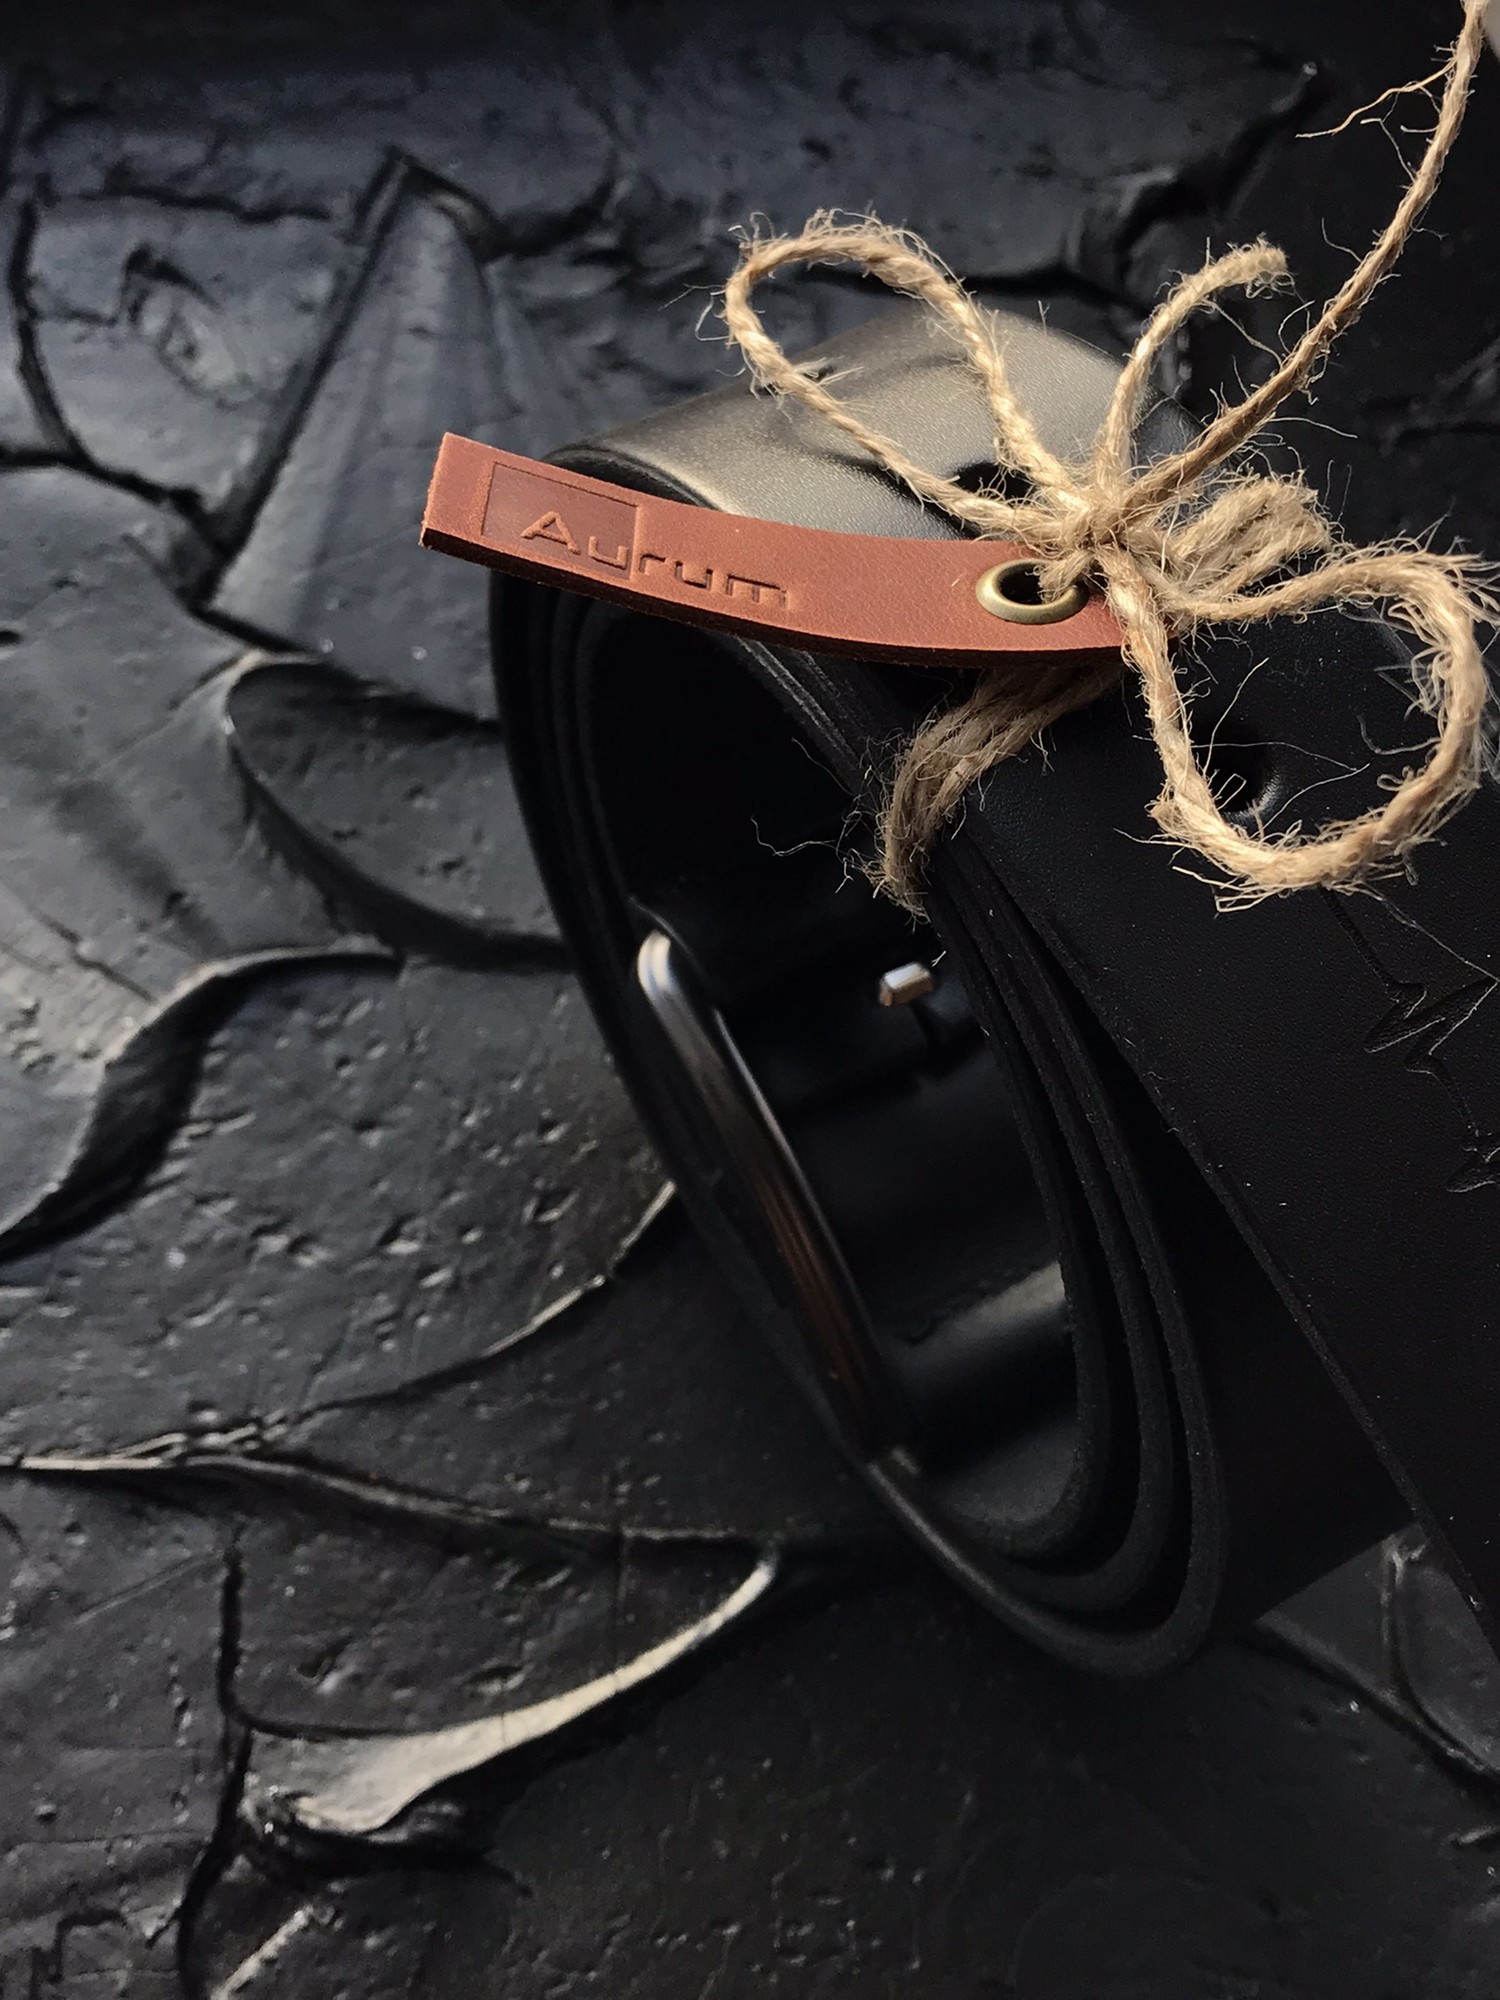 Leather belt with engraving